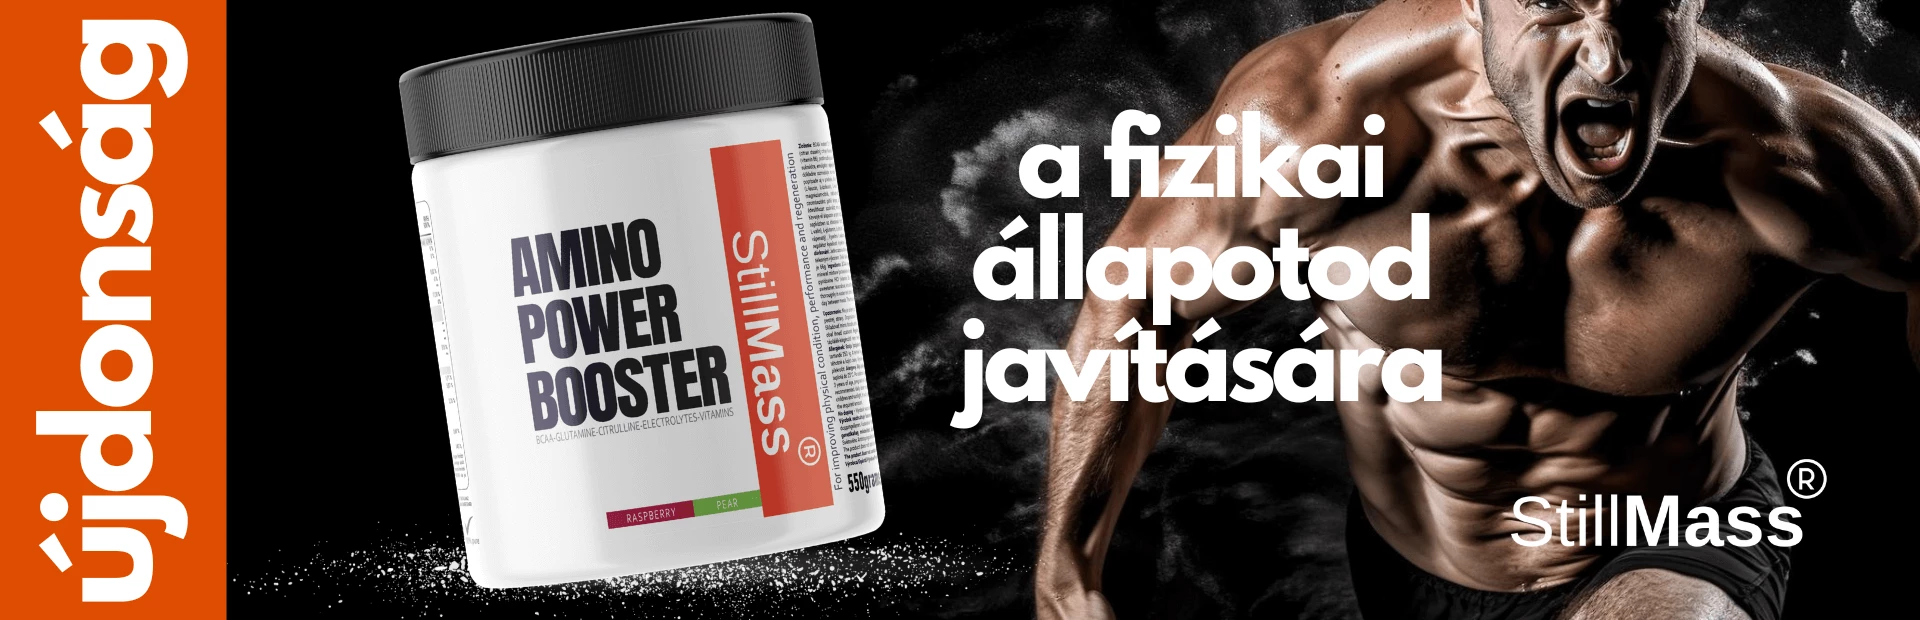 amino power booster